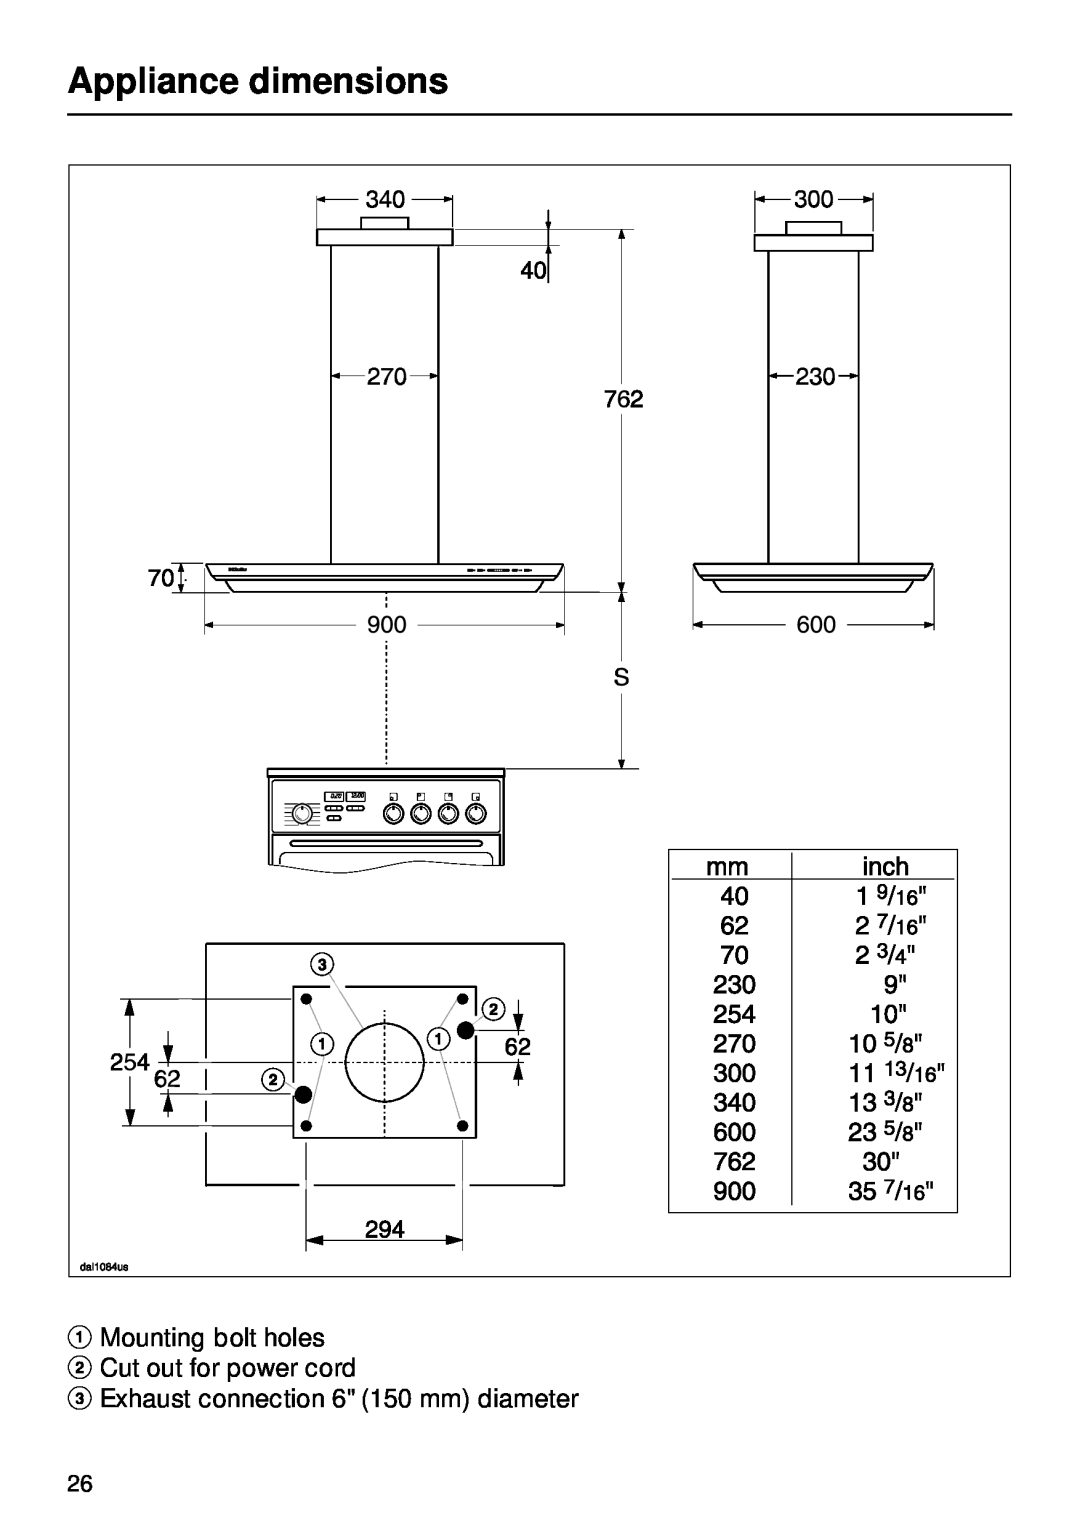 Miele DA270 Appliance dimensions, aMounting bolt holes b Cut out for power cord, c Exhaust connection 6 150 mm diameter 